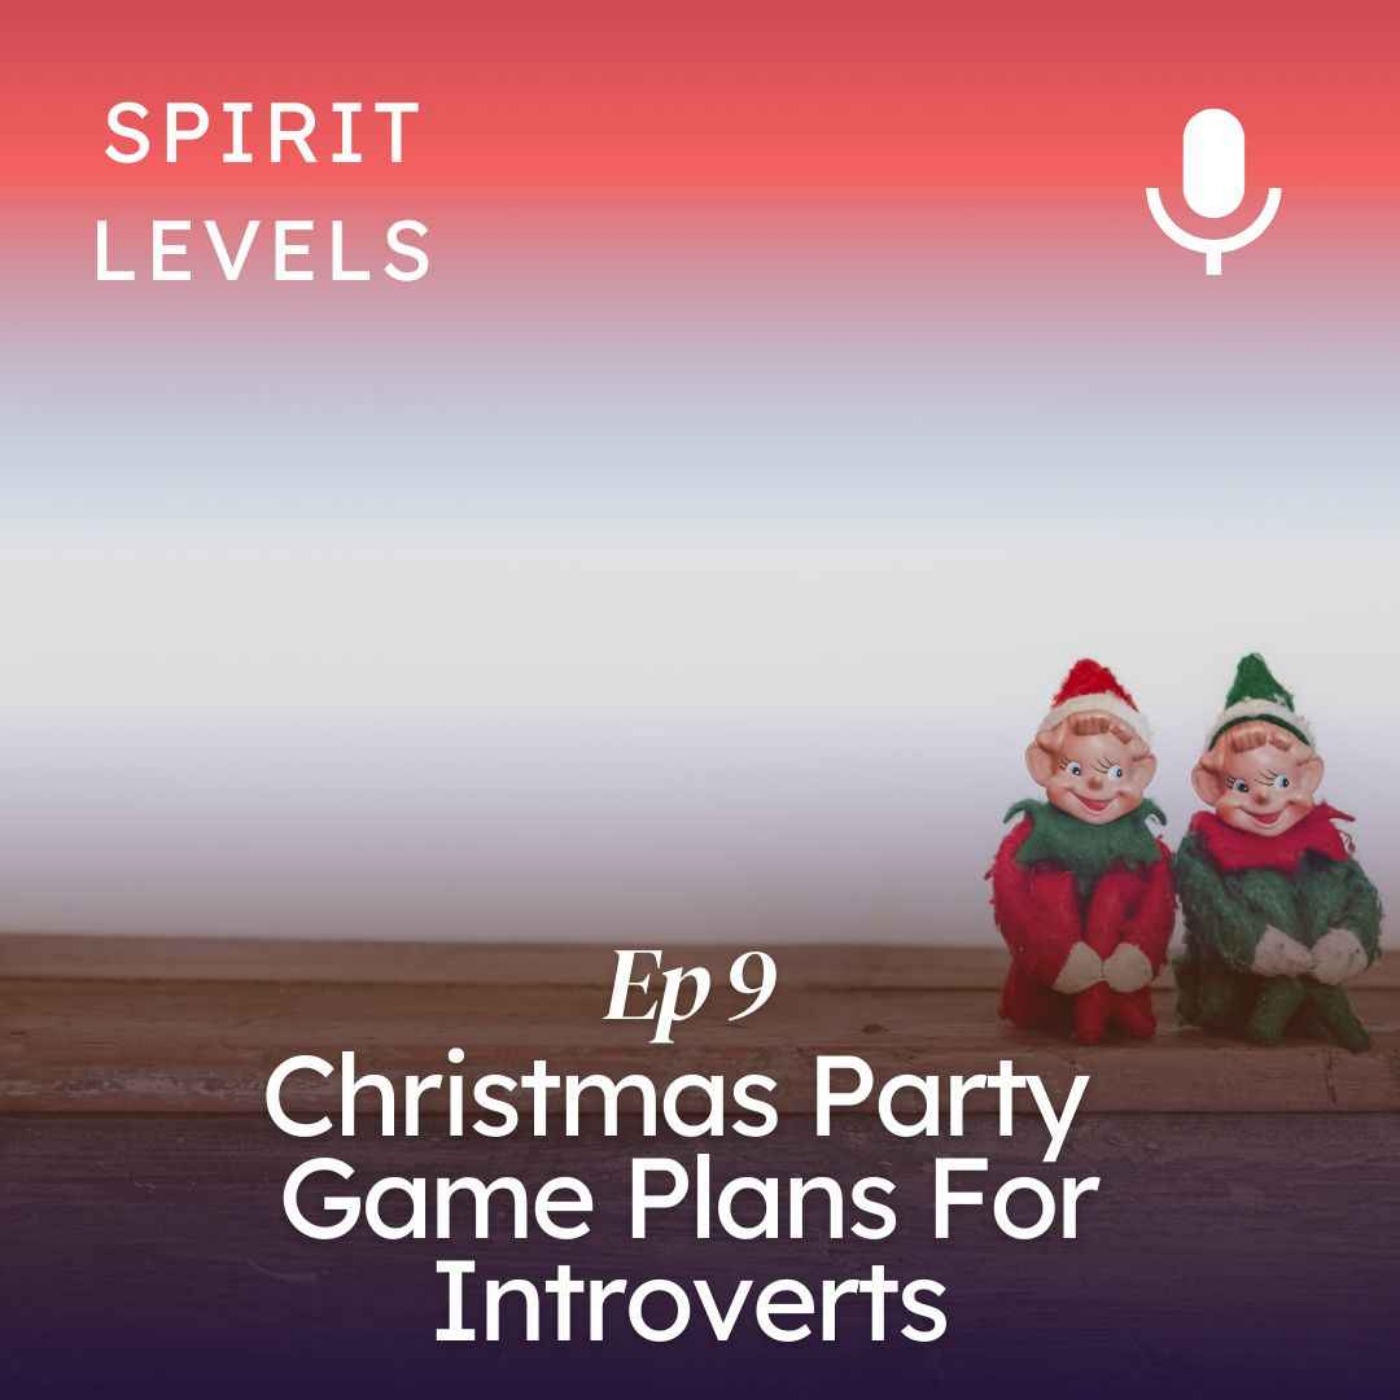 Survive the Christmas Party: Game Plans for Introverts